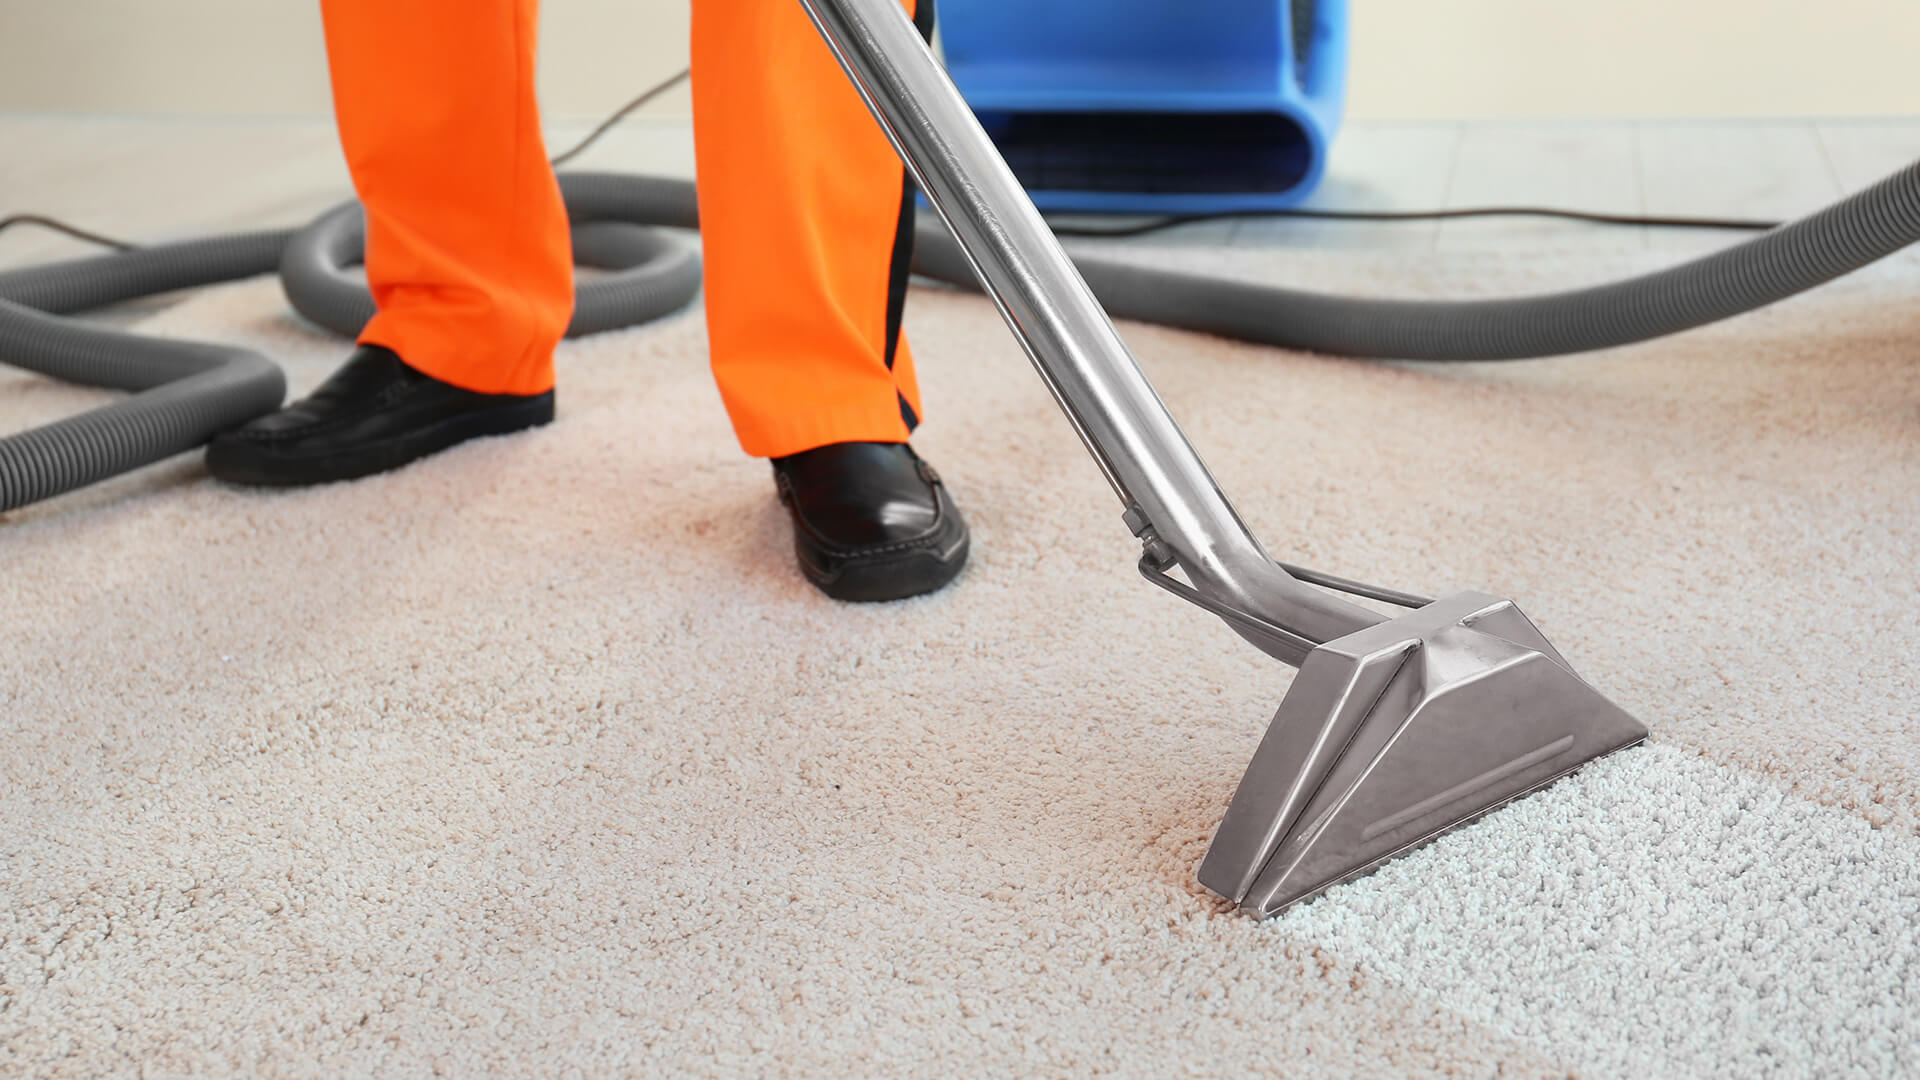 Carpet cleaning method - hot water extraction